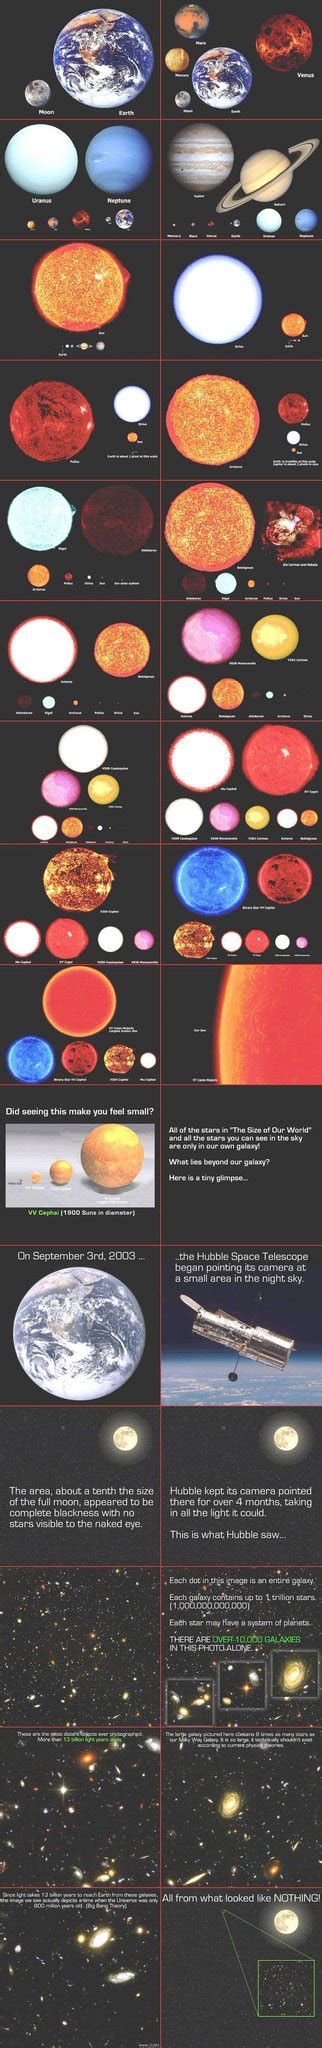 Simon Kuestenmacher On Twitter Infographic Teaches Us About The Scale Of The Universe Source